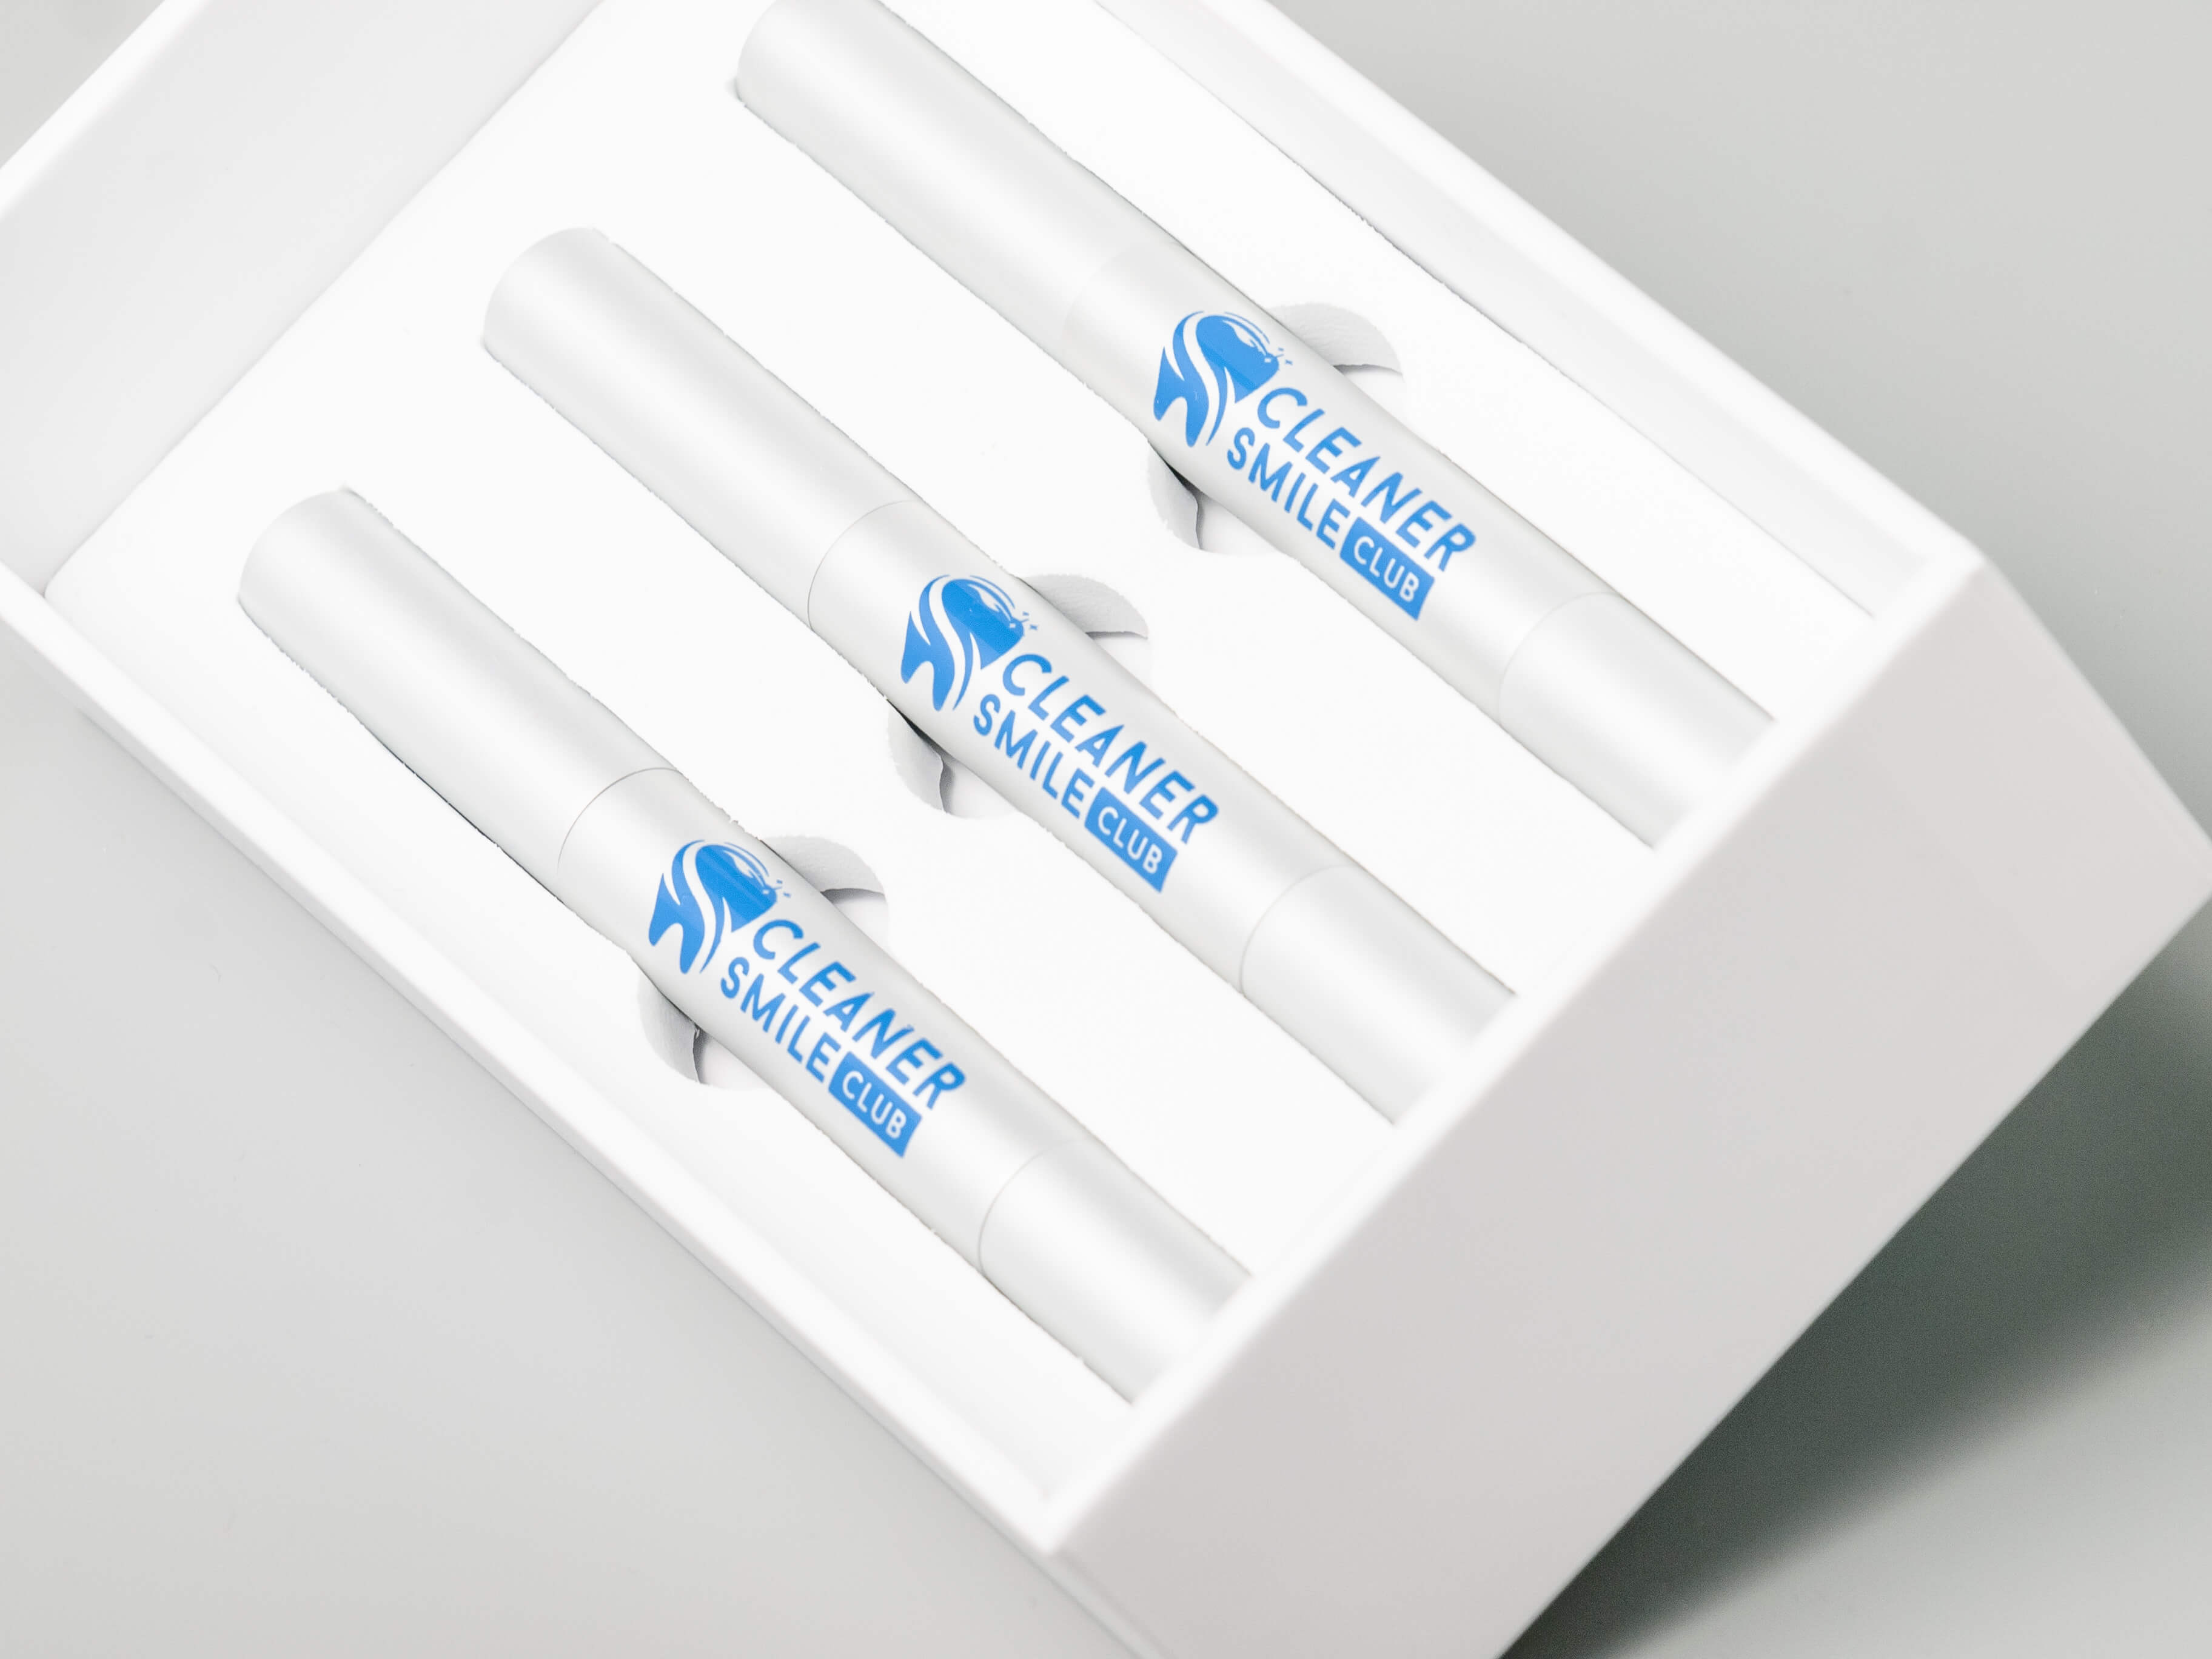 teeth whitening pen white kit from Cosmetic Cleaner Smile Club Brand white box on the grey background still photography production made by Fantastic Imago Branding, Advertising and Consulting Agency